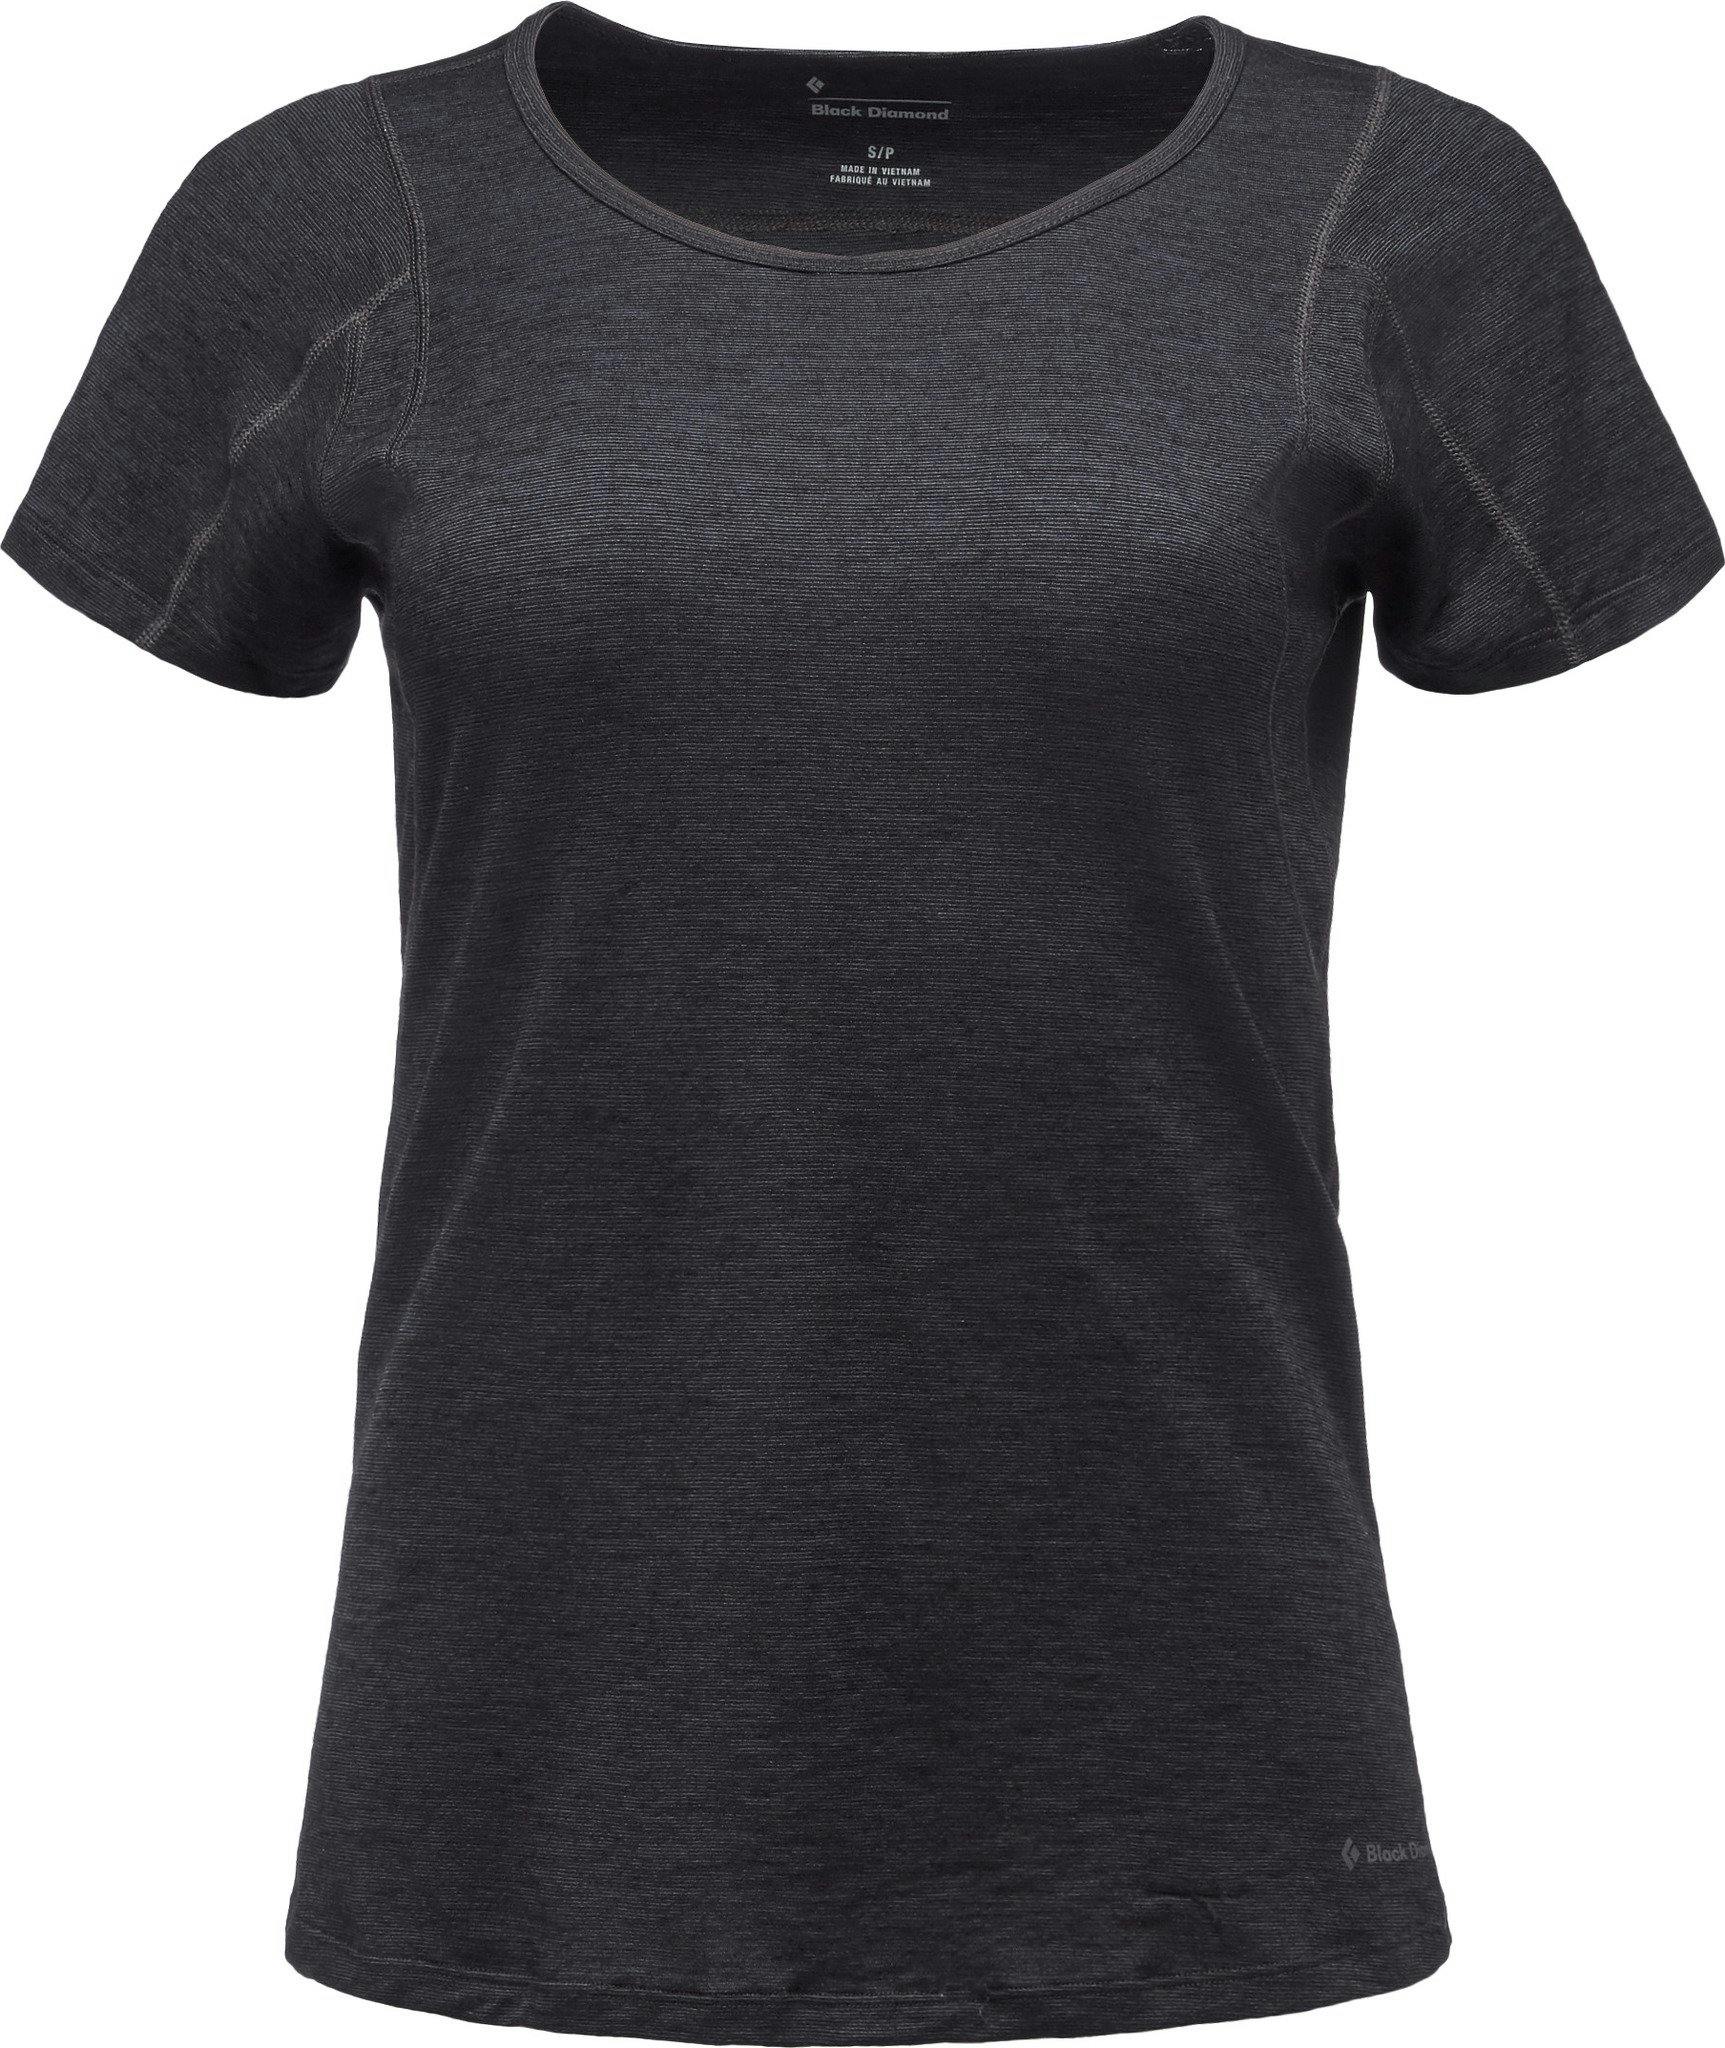 Product image for Rhythm Tee - Women's